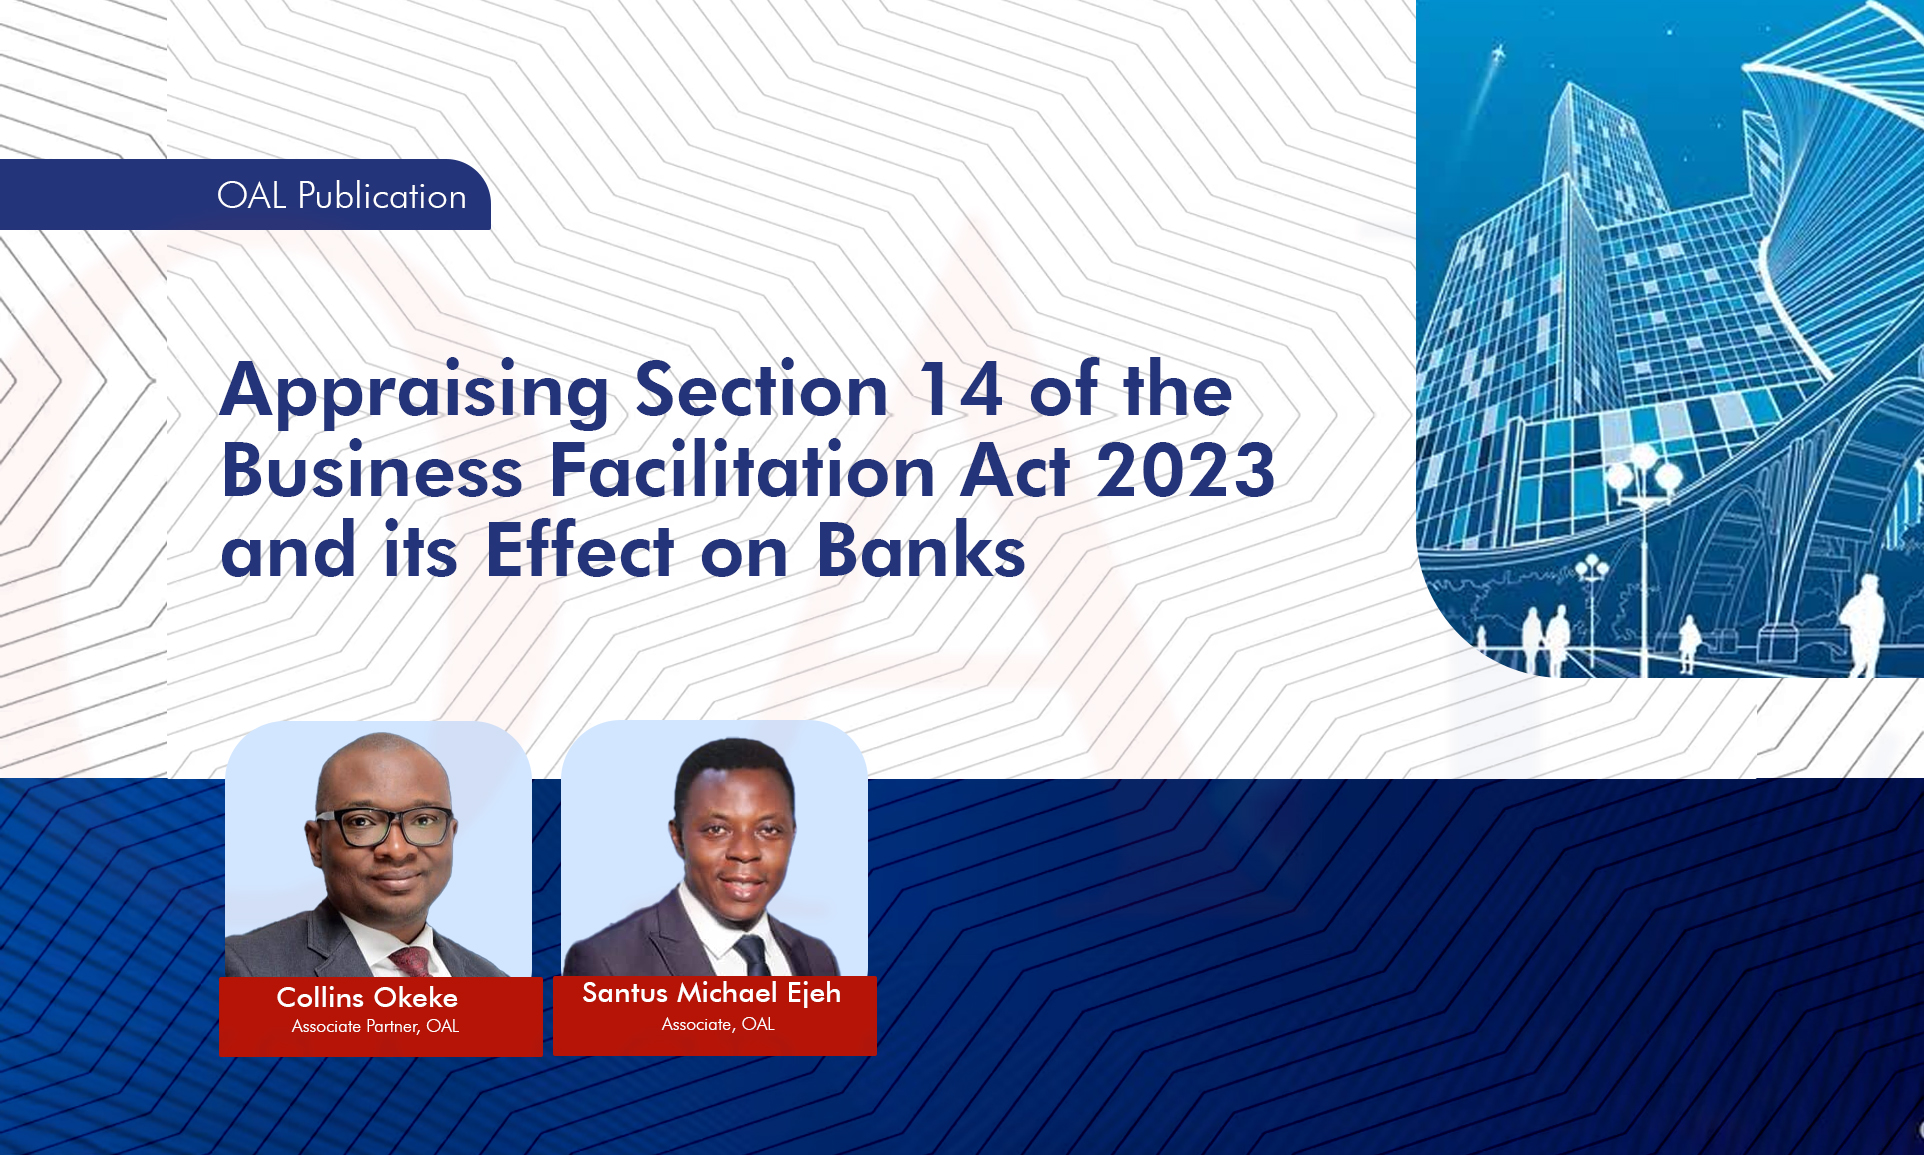 Appraising Section 14 of the Business Facilitation Act 2023 and its Effect on Banks.